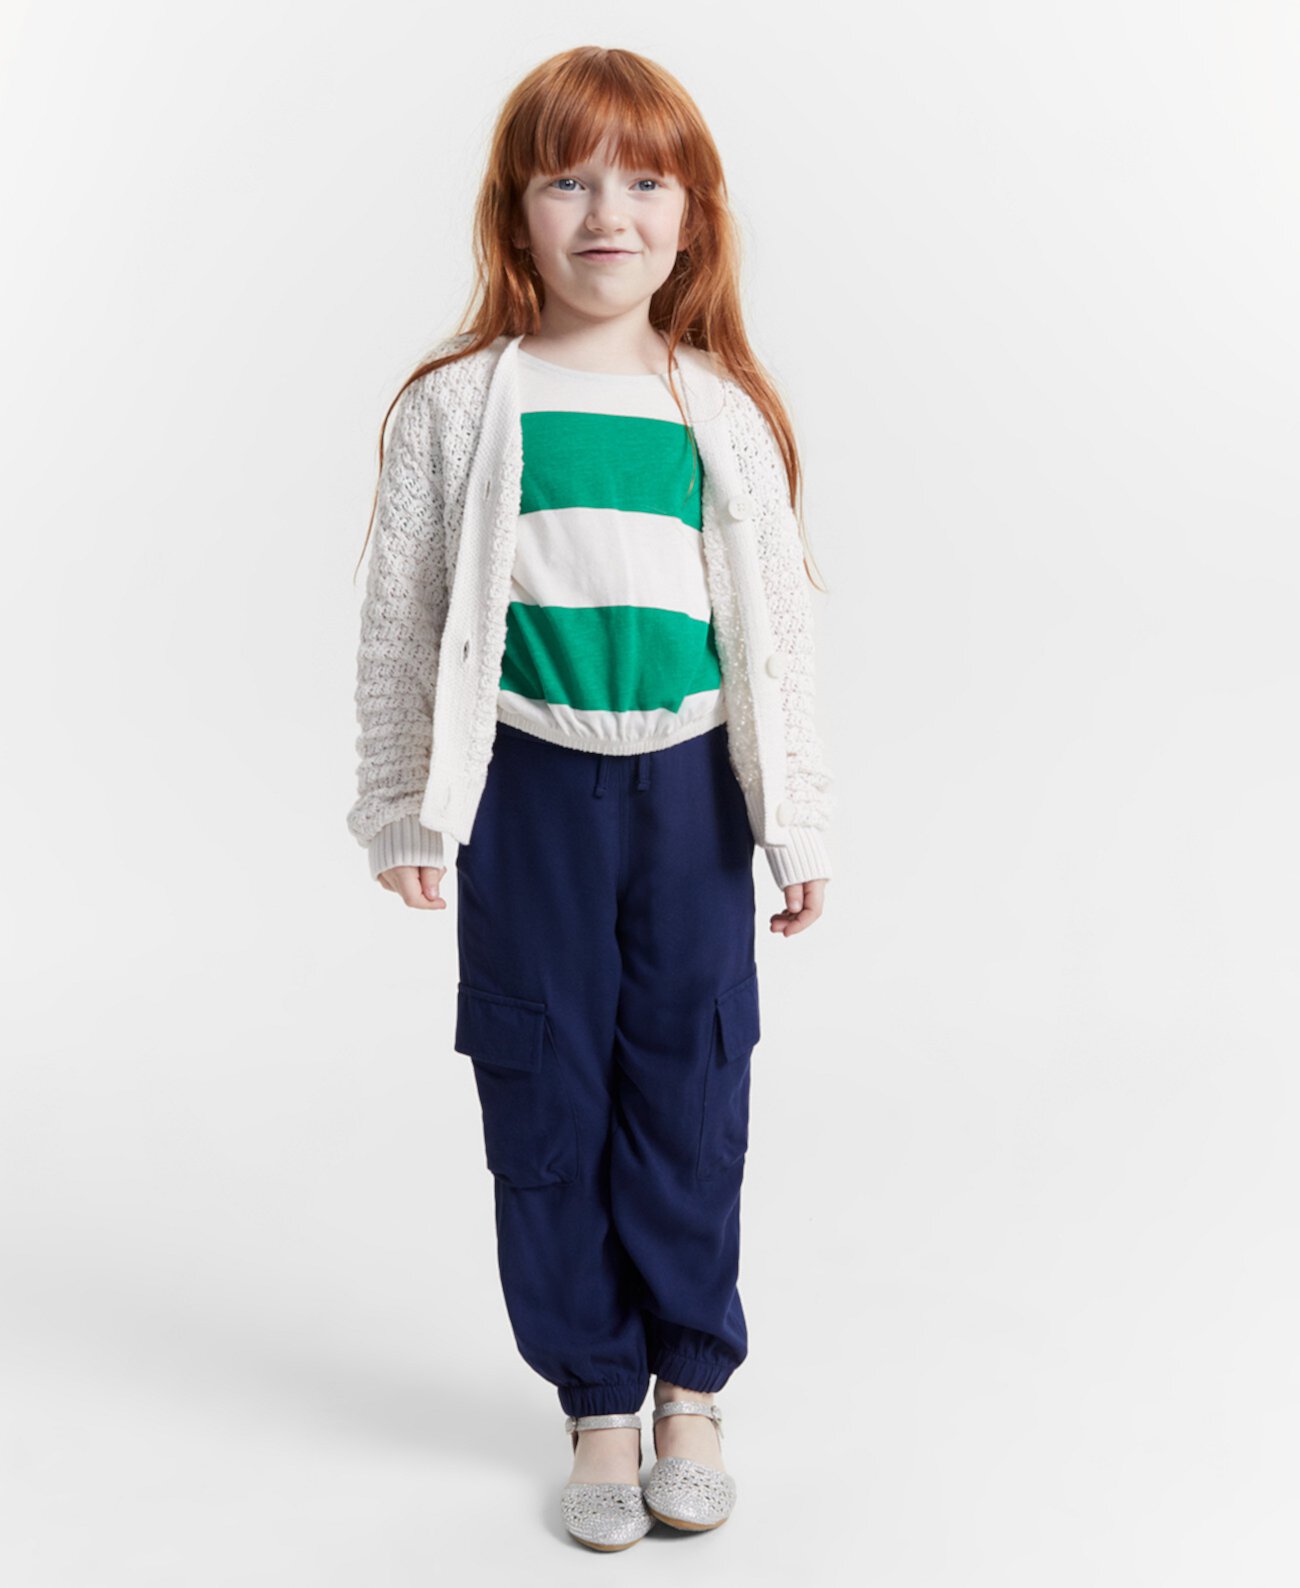 Girls Open-Stitch Cotton Cardigan, Created for Macy's Epic Threads